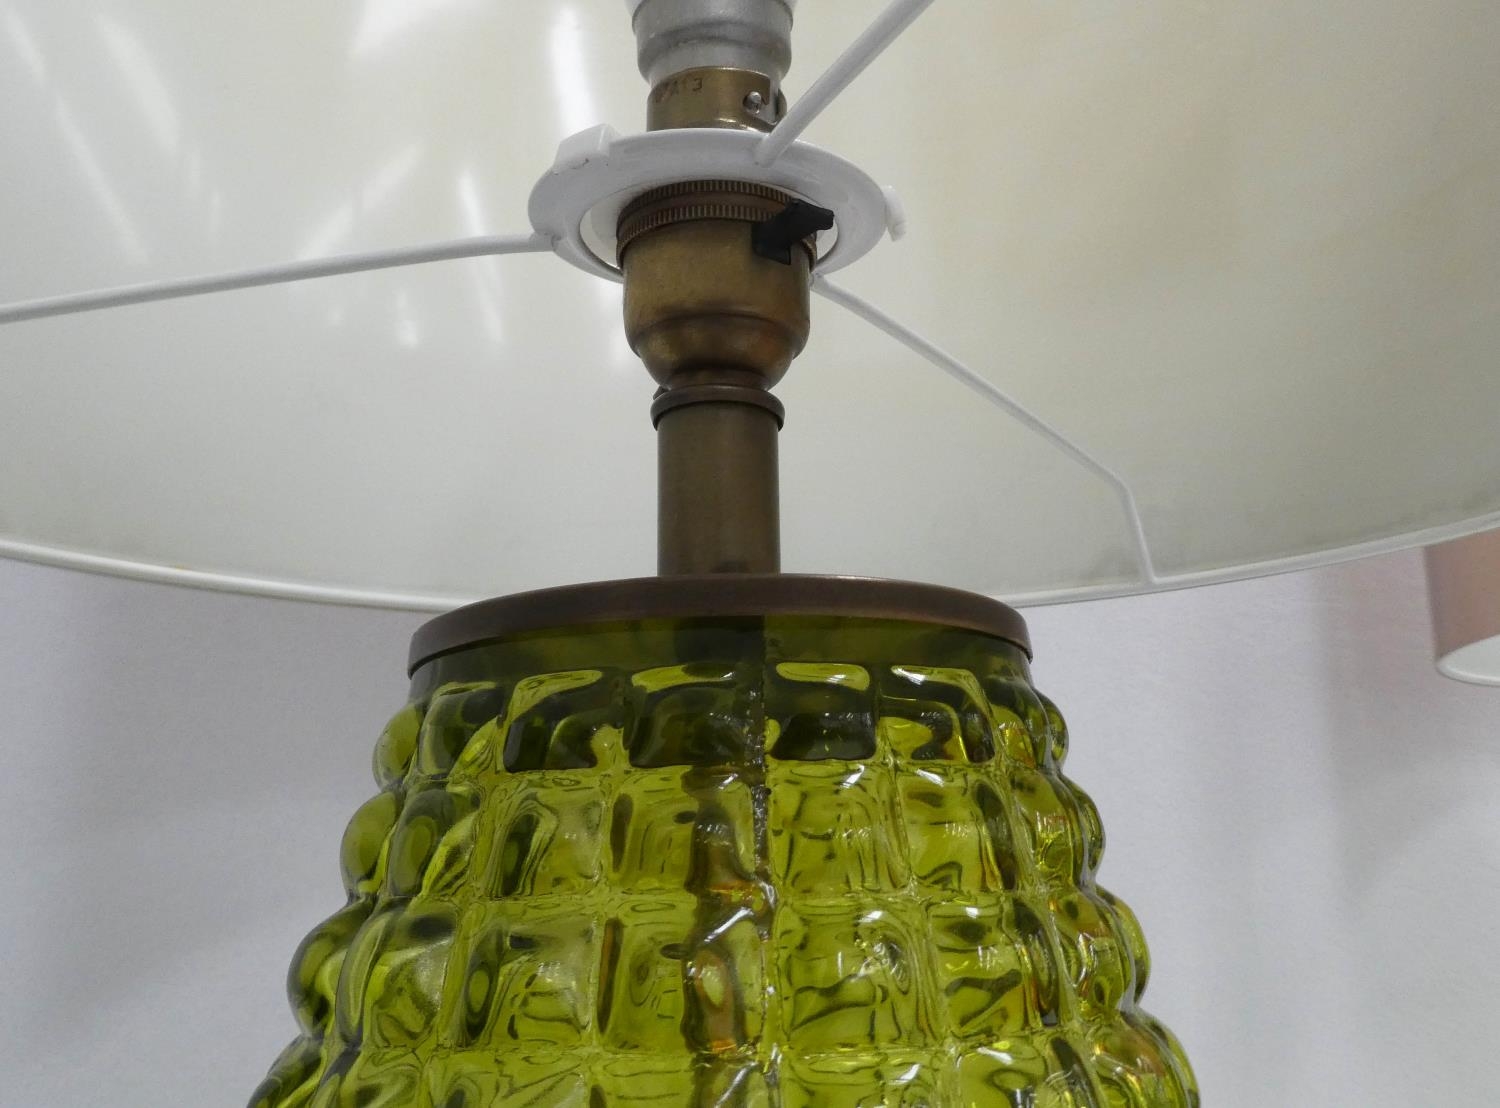 TABLE LAMPS, two, 69cm H, with shades, contemporary green glass design. (2) - Image 4 of 5